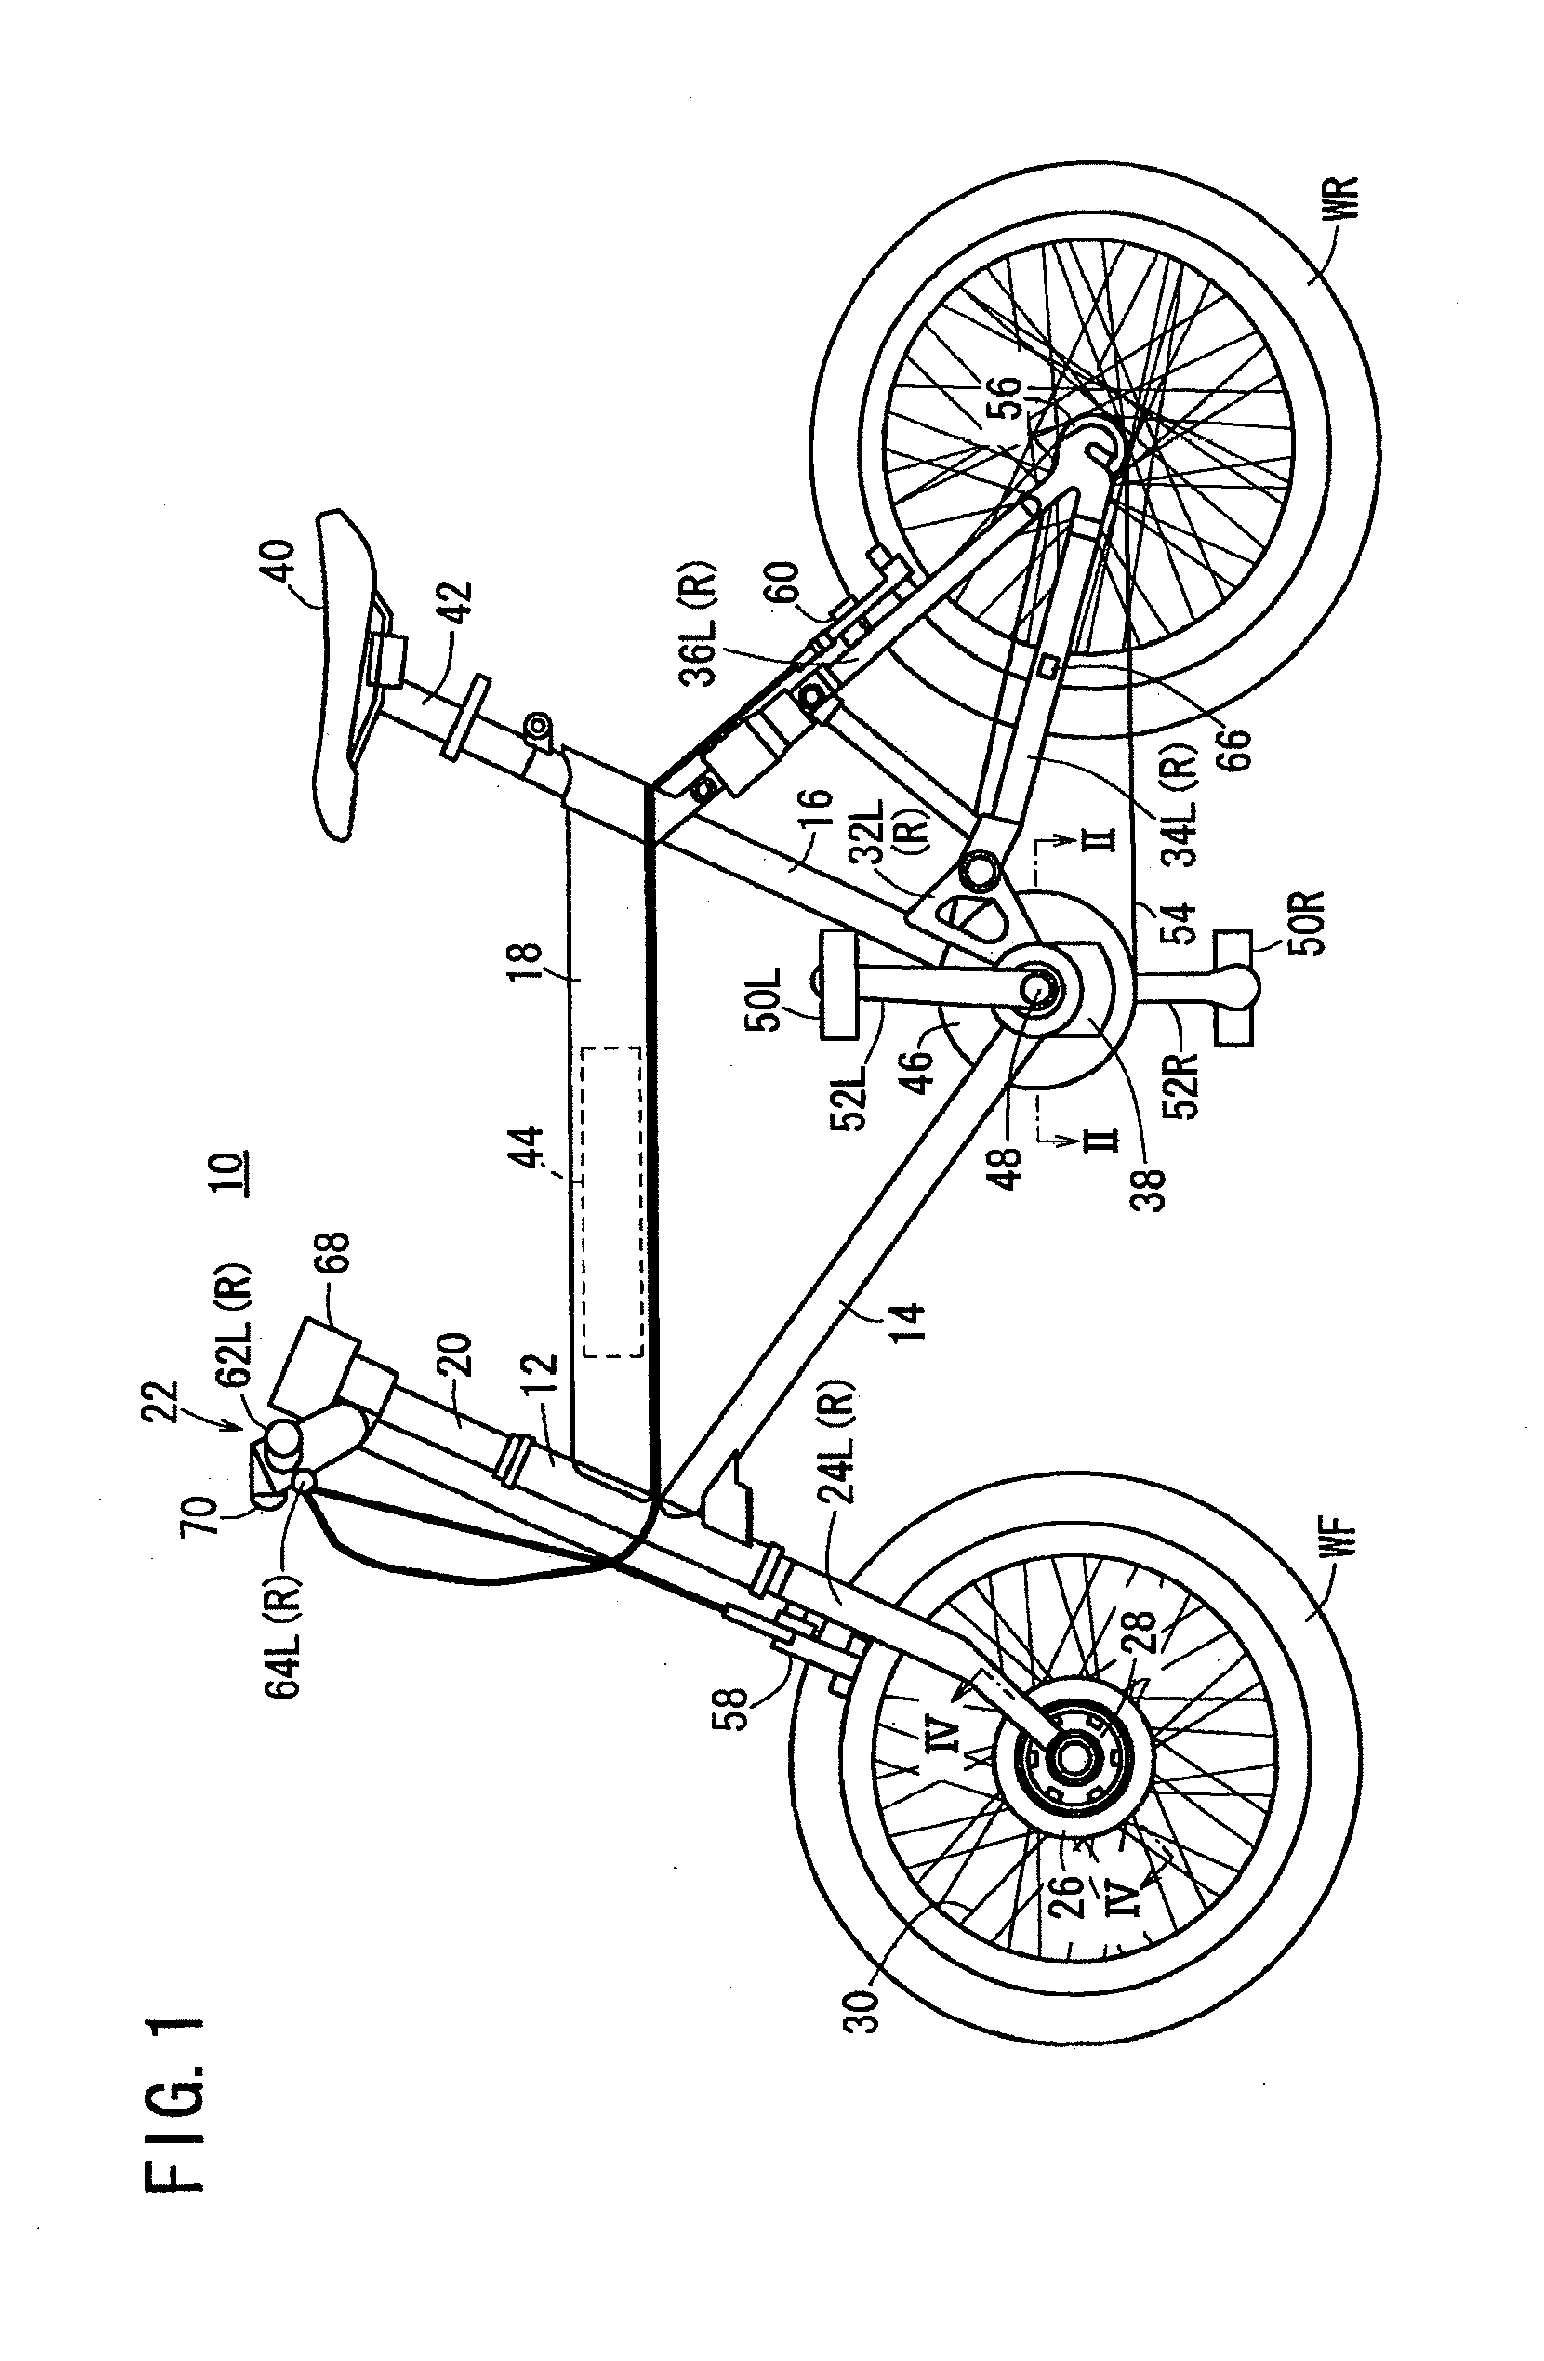 Control apparatus for motor-assisted bicycle